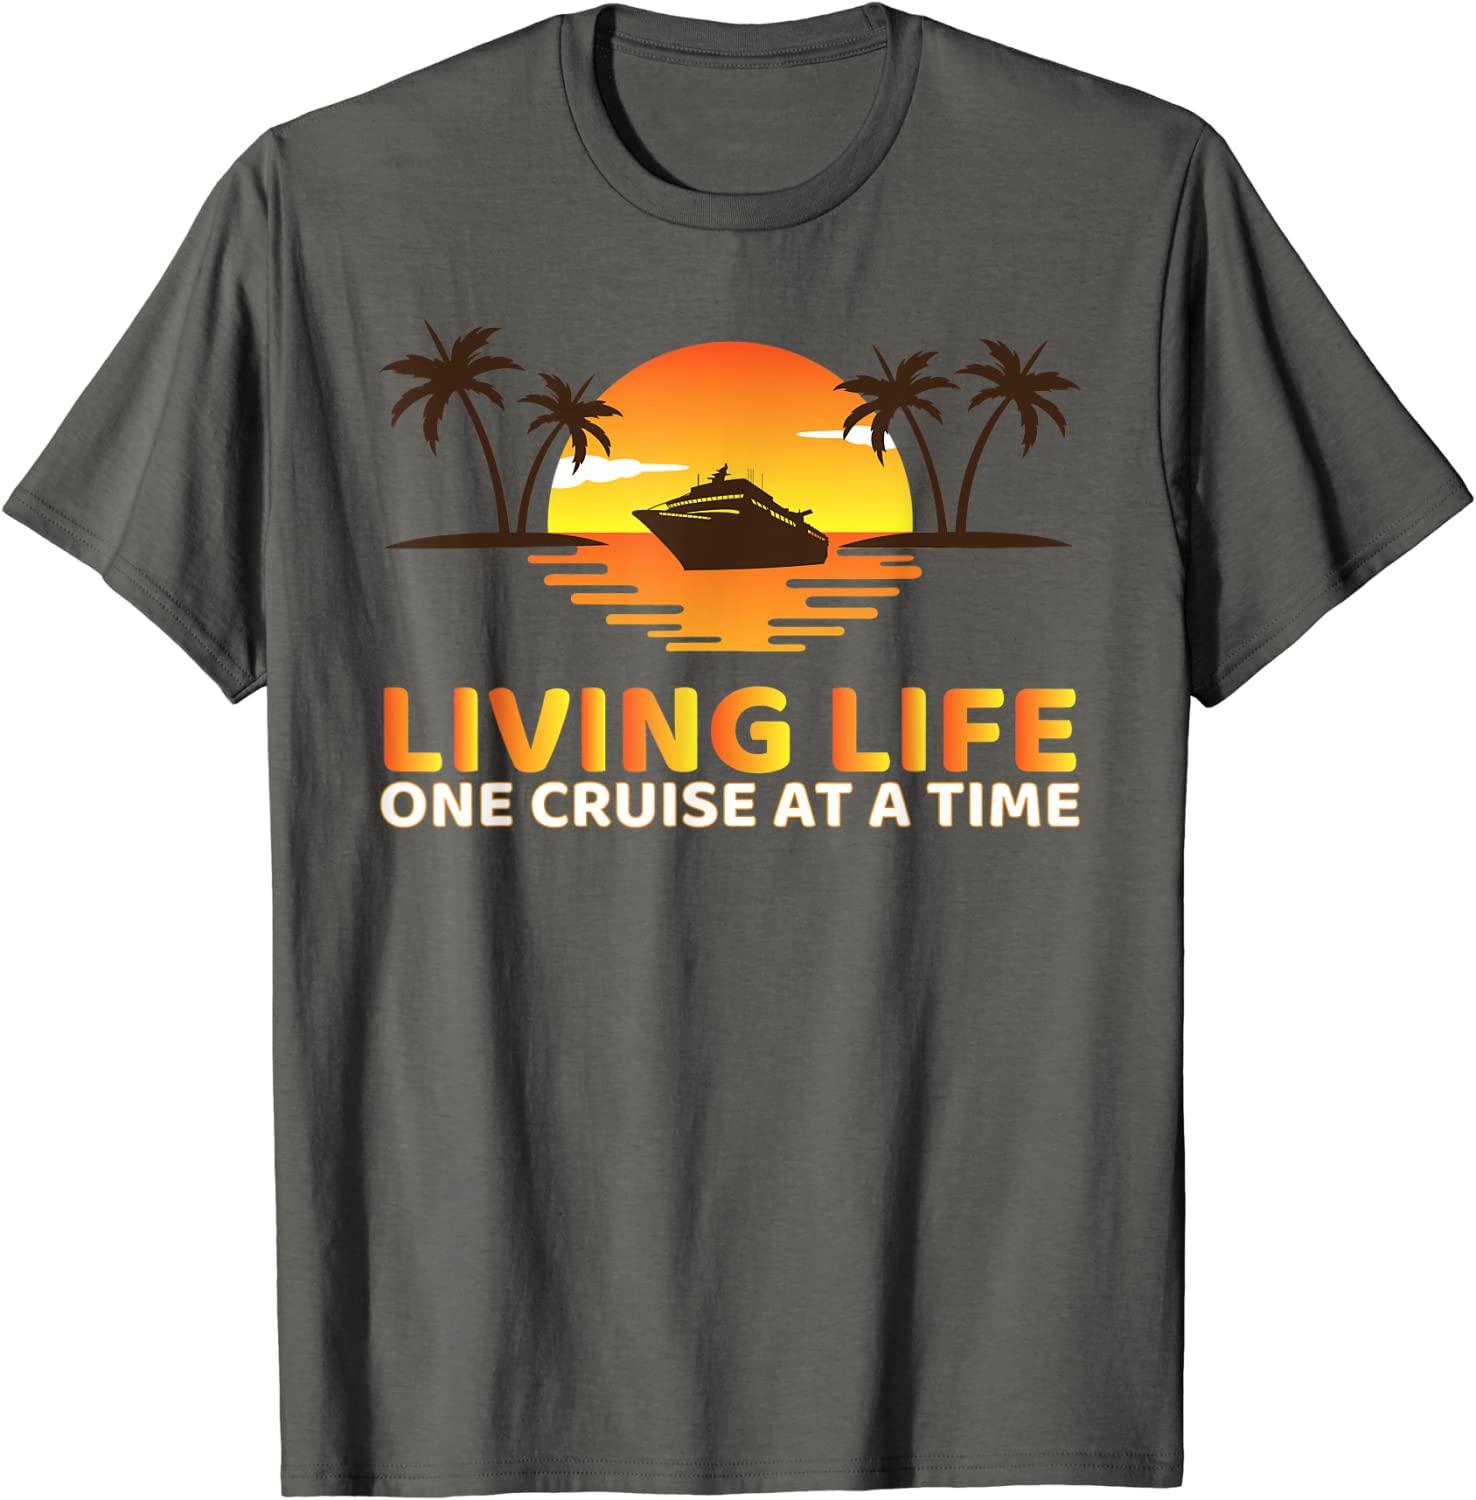 Living Life One Cruise At A Time Funny Cruise Ship T-Shirt - Ellie Shirt